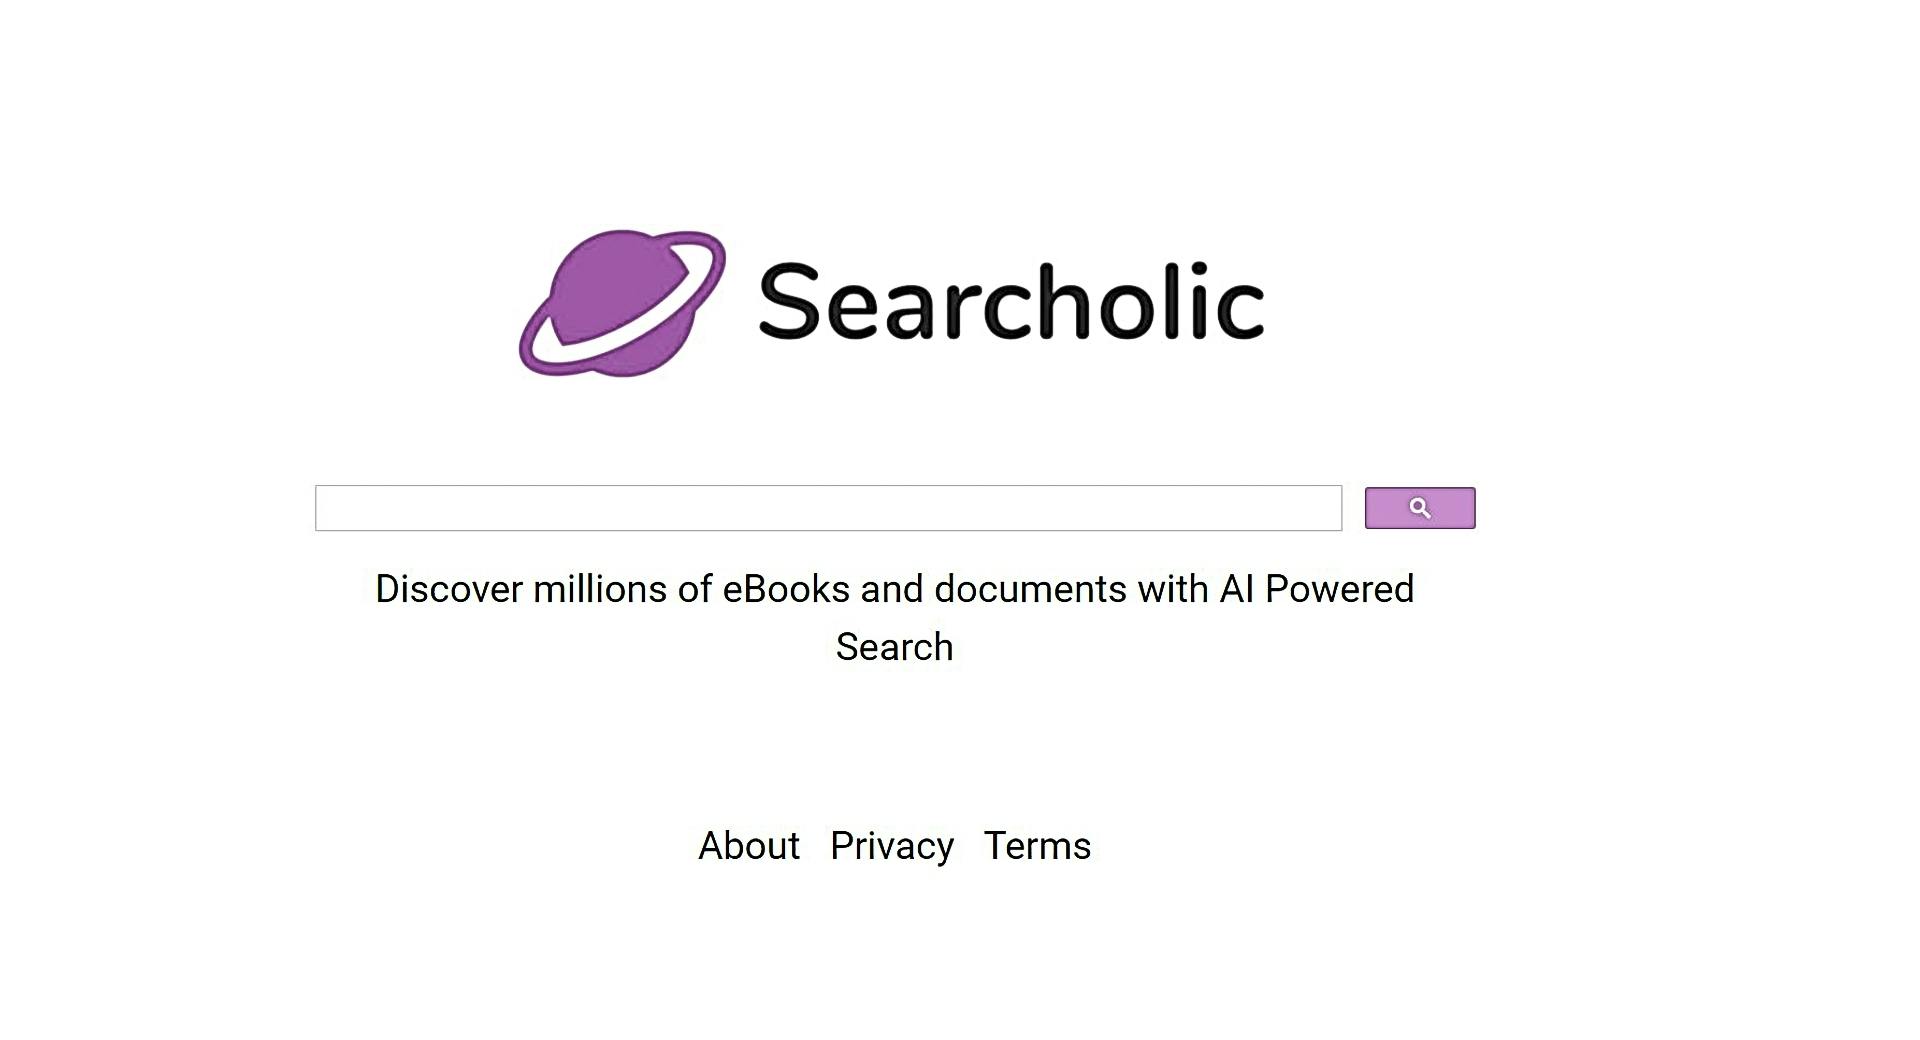 Searcholic featured